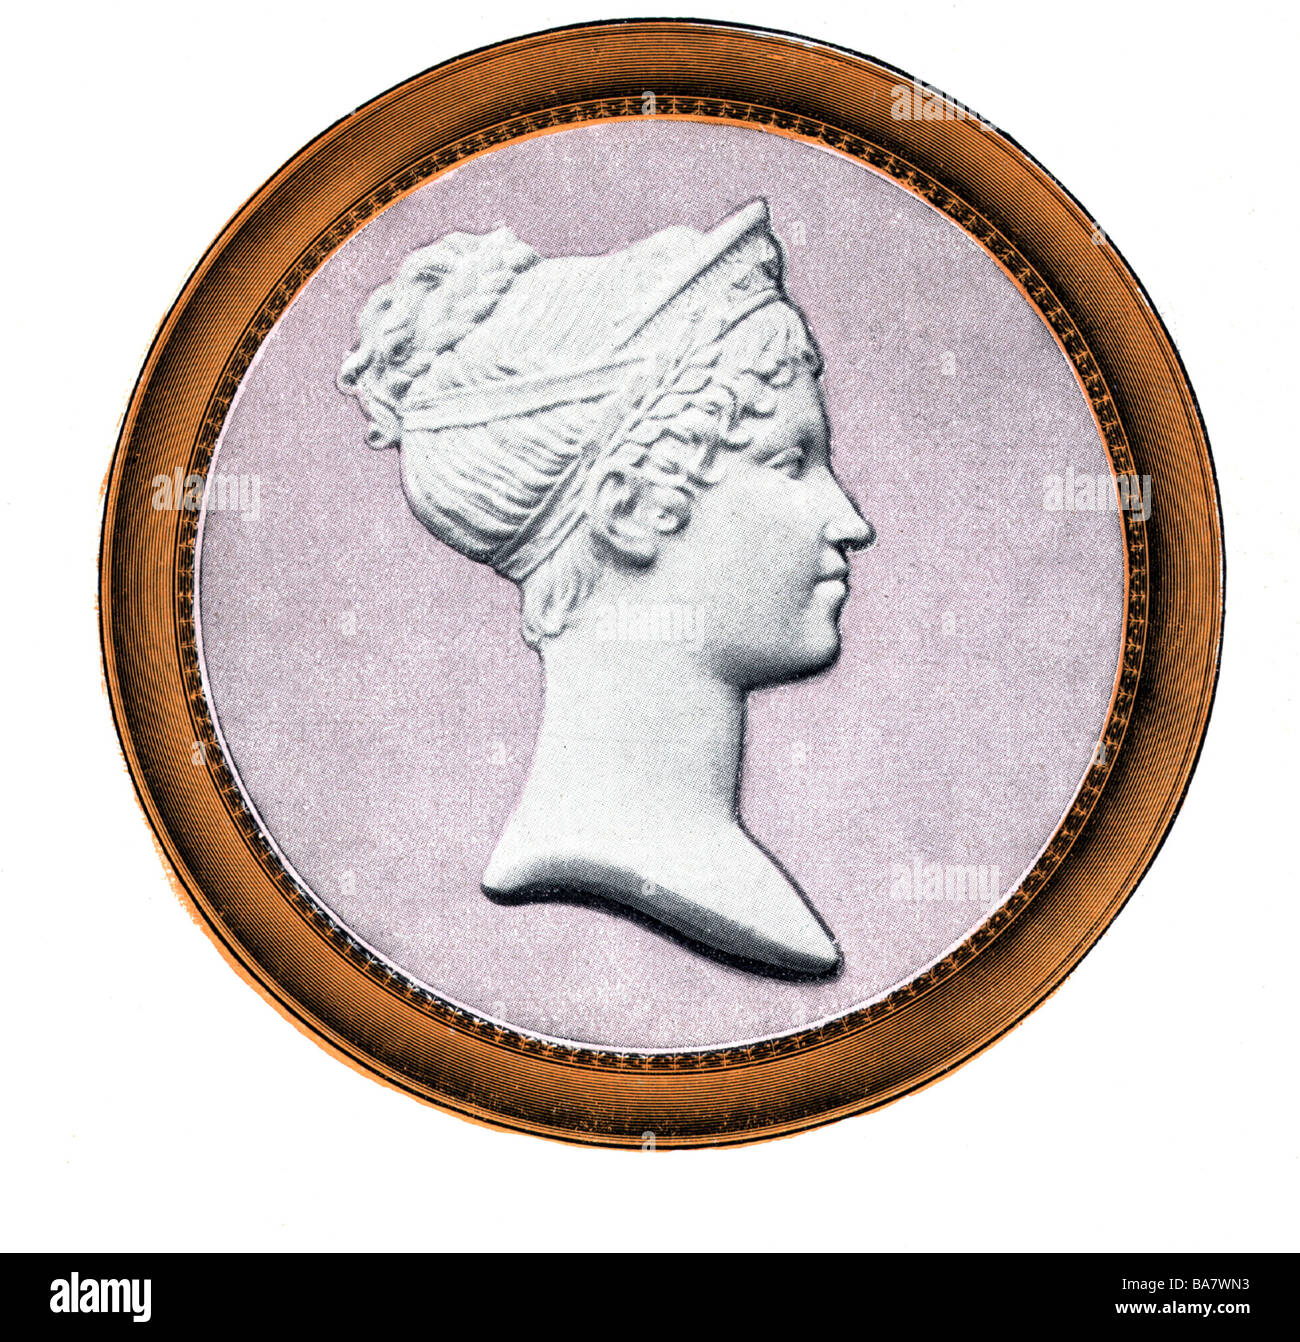 Marie Louise, 12.12.1791 - 12.12.1847, Empress Consort of France 2.4.1810 - 6.4.1814, portrait, print after porcelain relief, Sevres manufactory, circa 1810, , Stock Photo